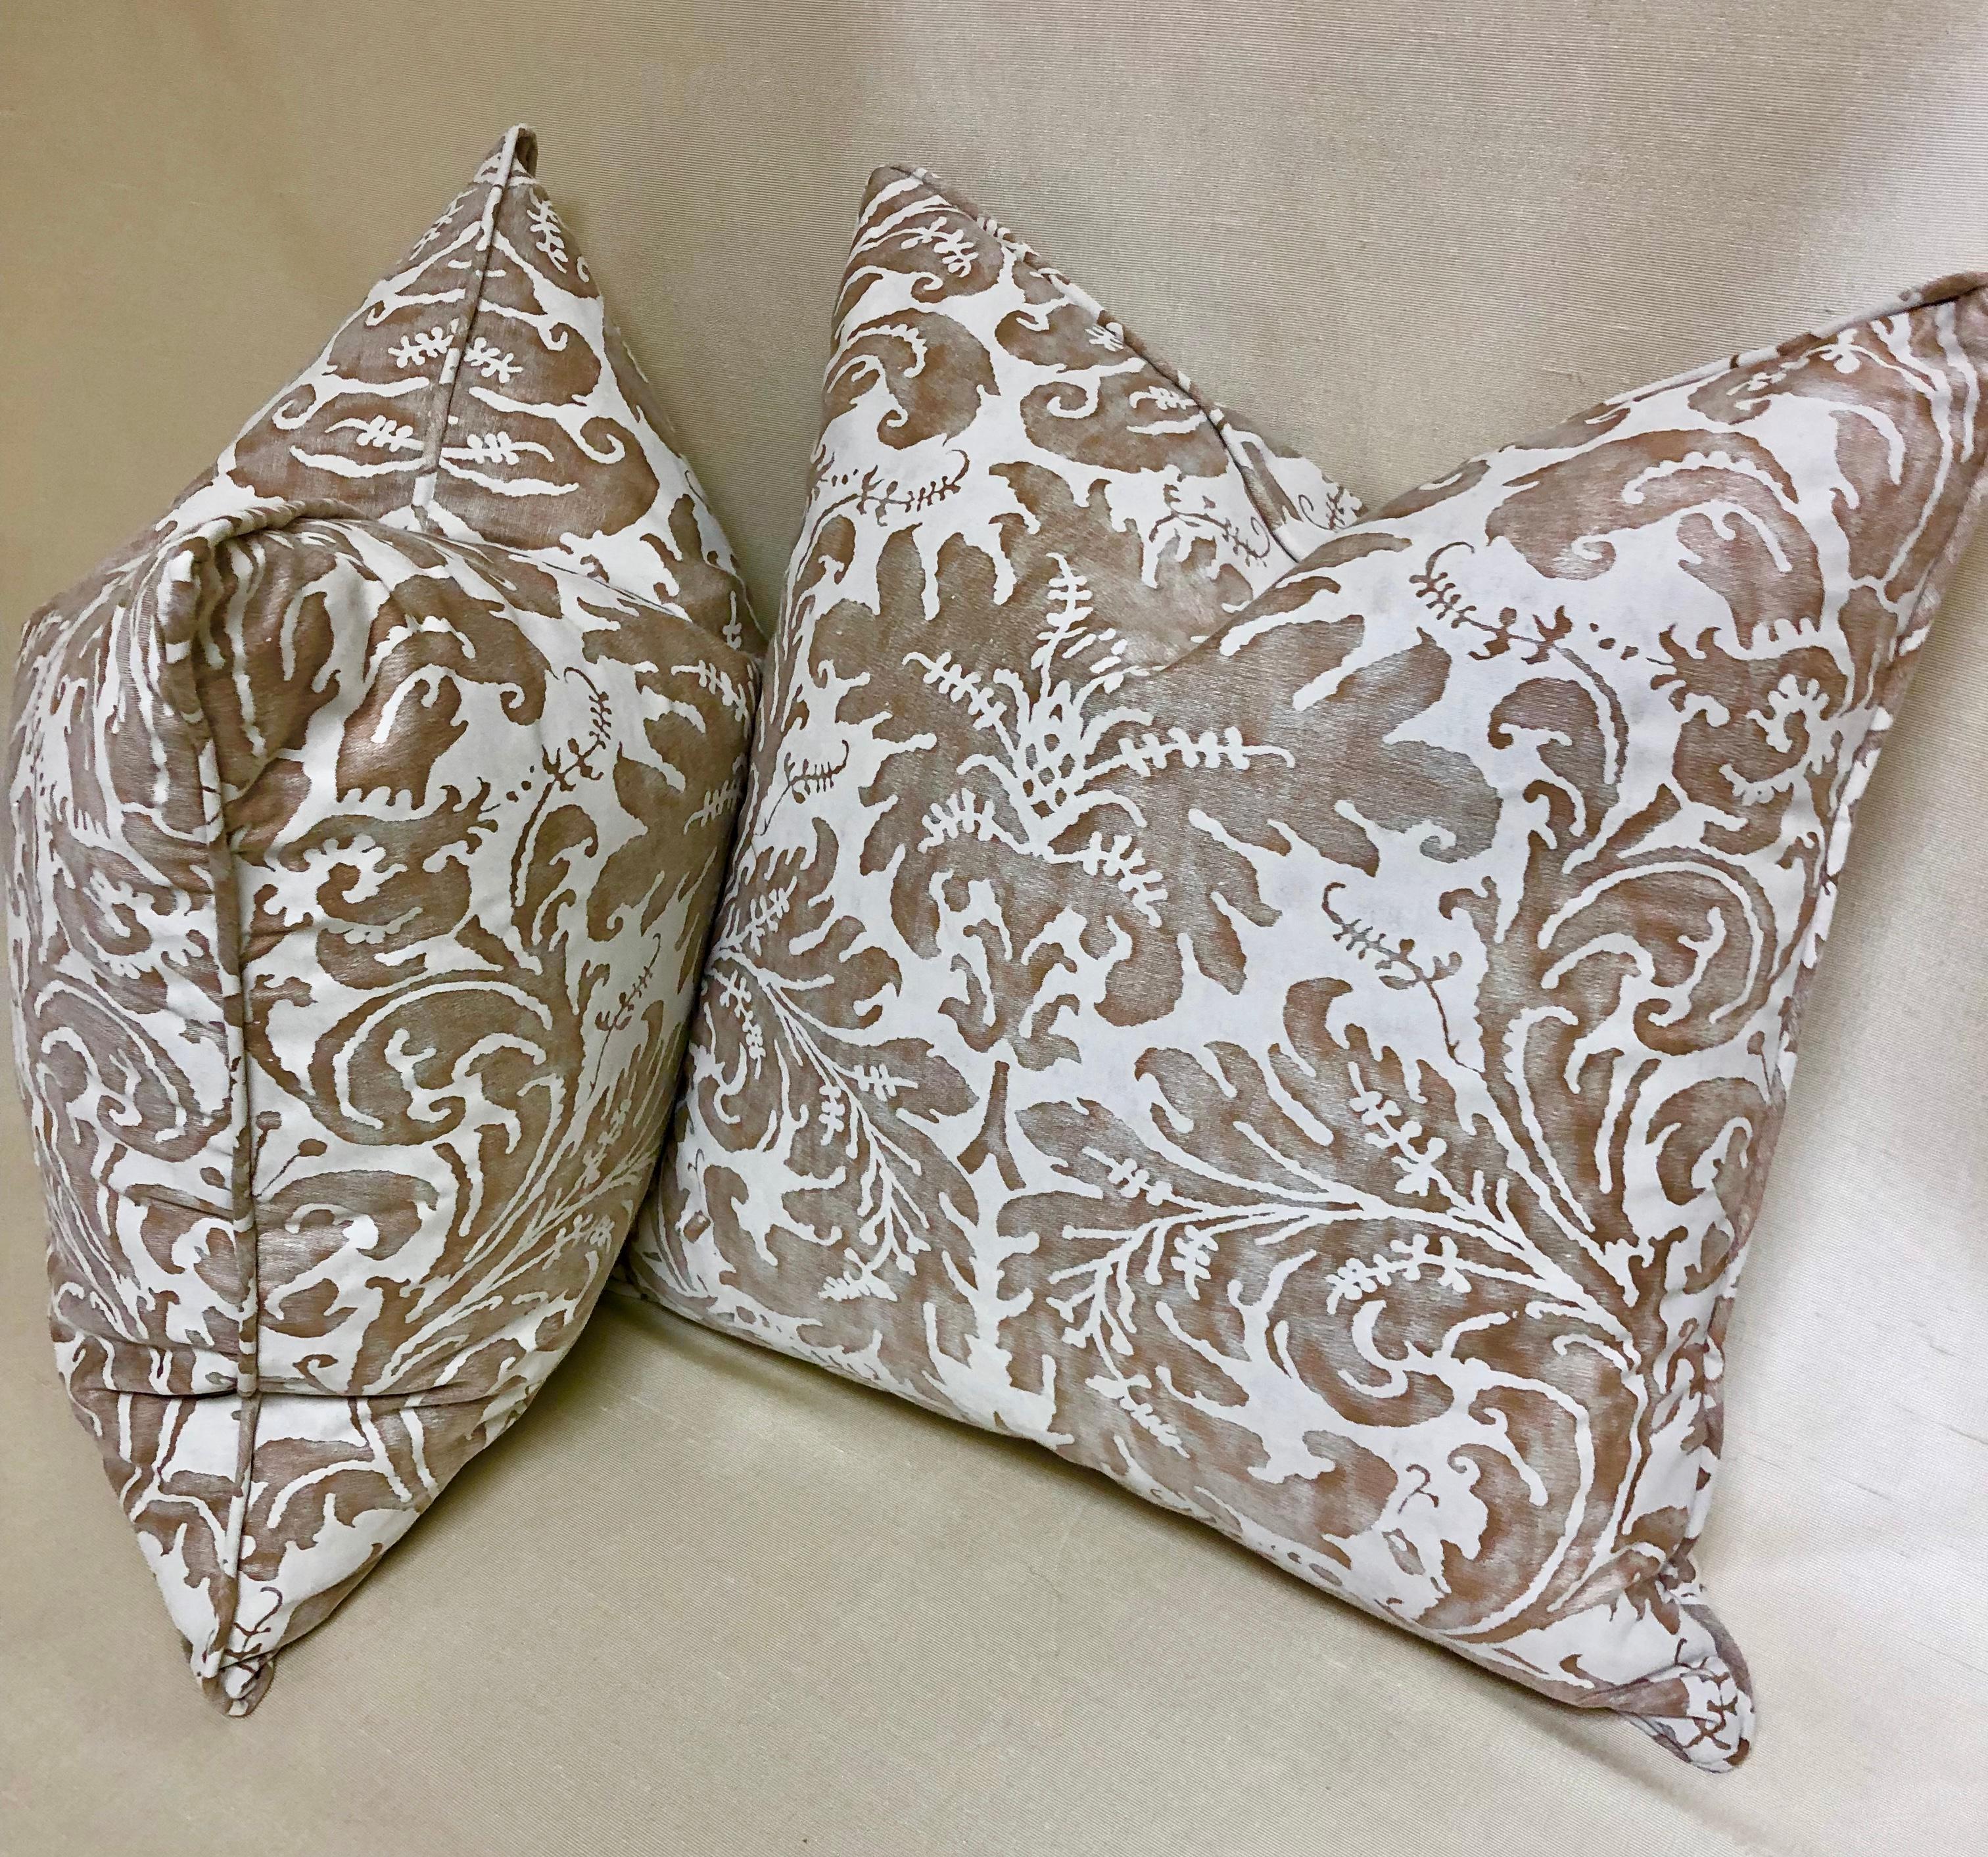 Pair of Fortuny Down-Filled Cushions in the 